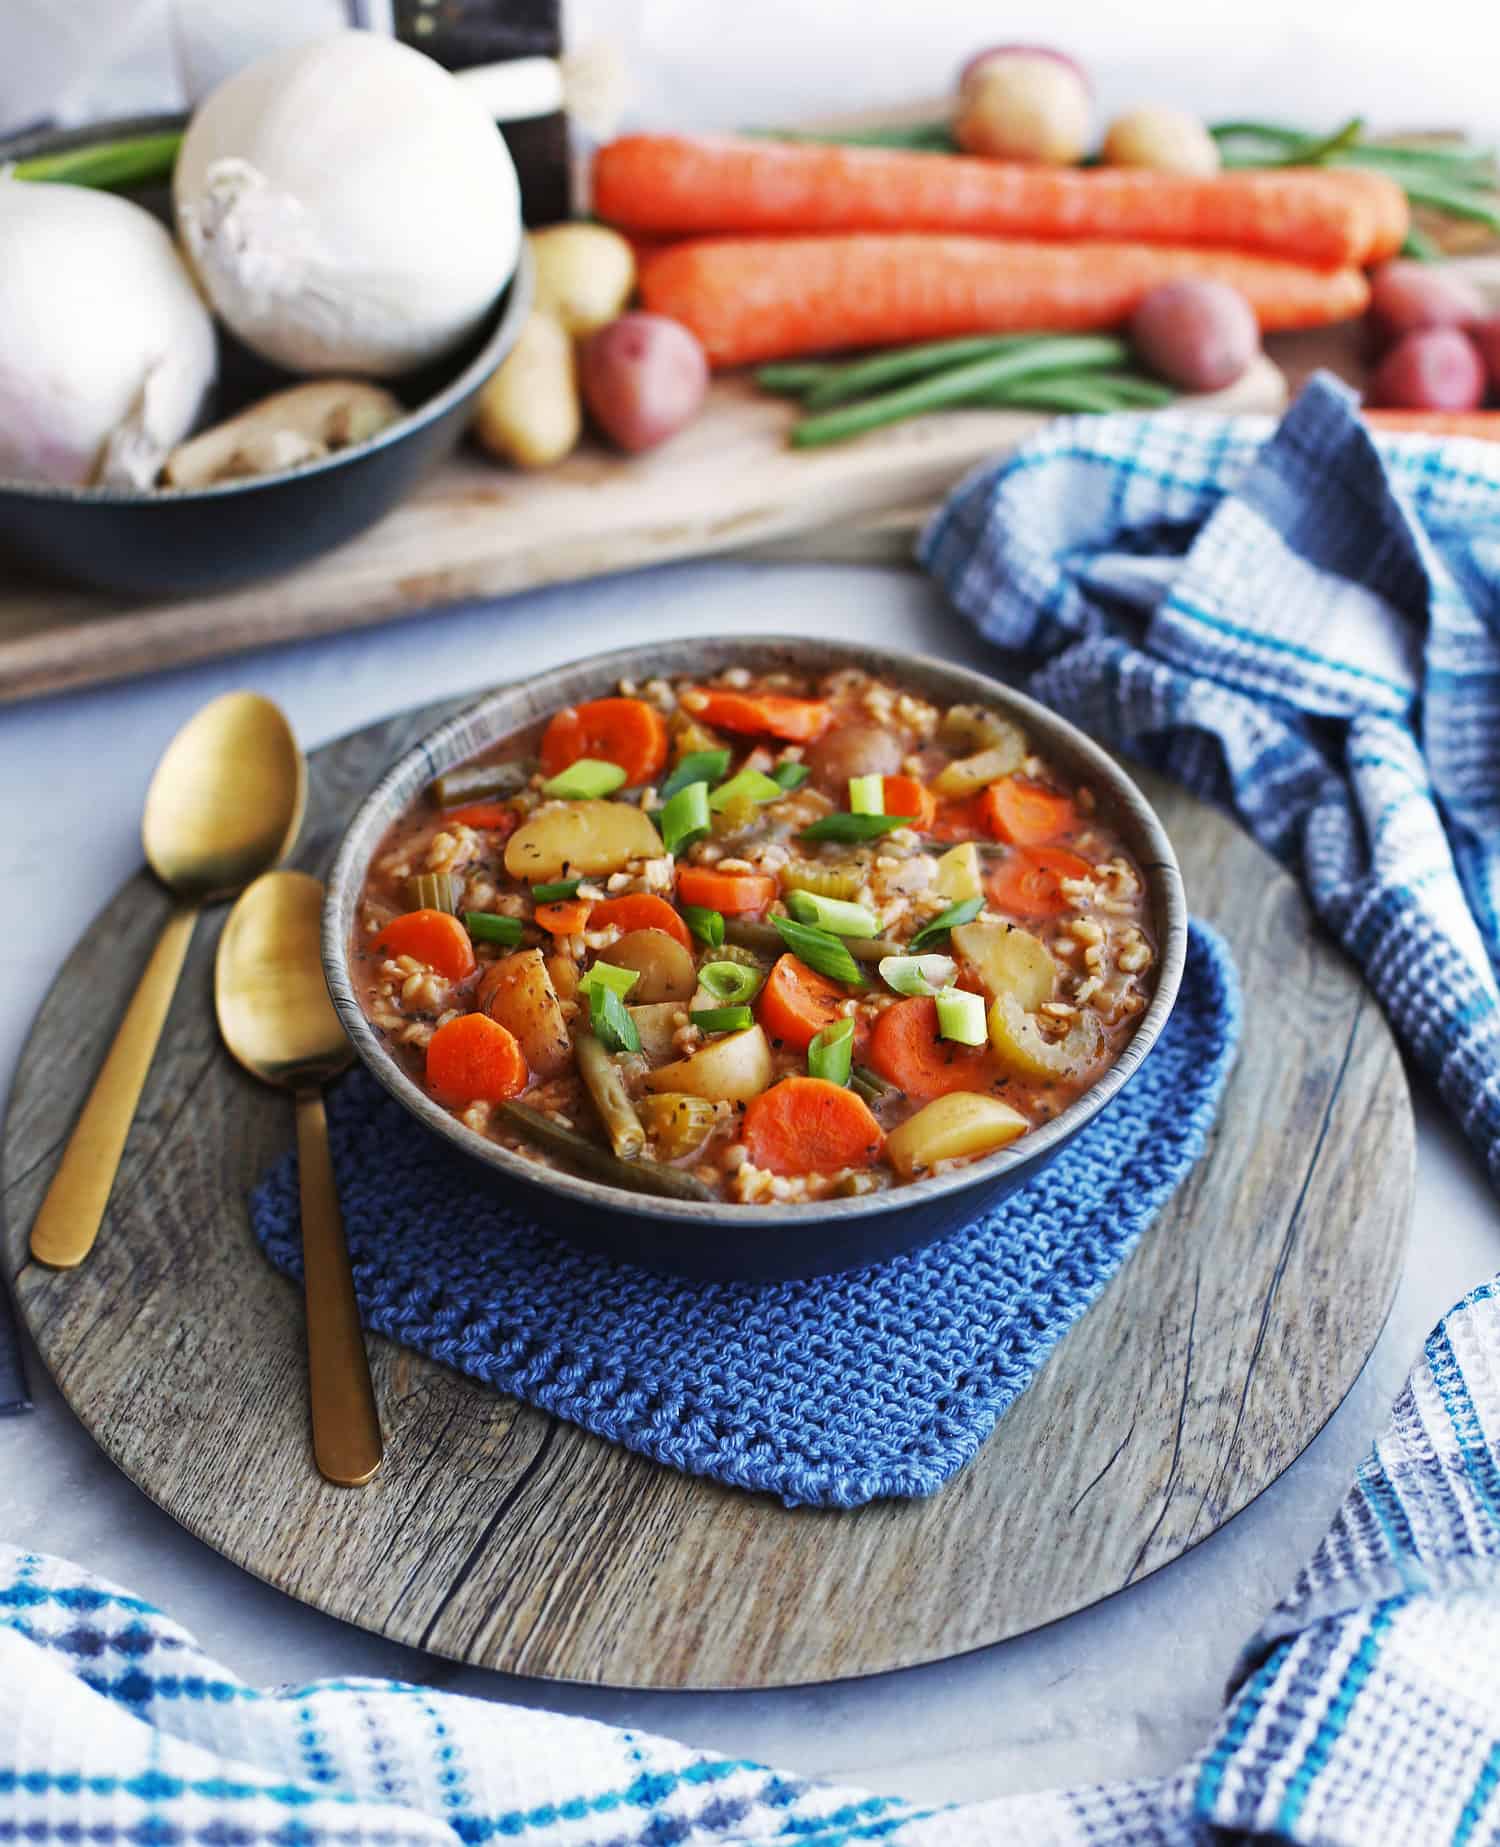 Delicious, comforting, and filling. This soup is full of healthy fresh vegetables and fiber-rich brown rice! It’s vegan and gluten-free too.